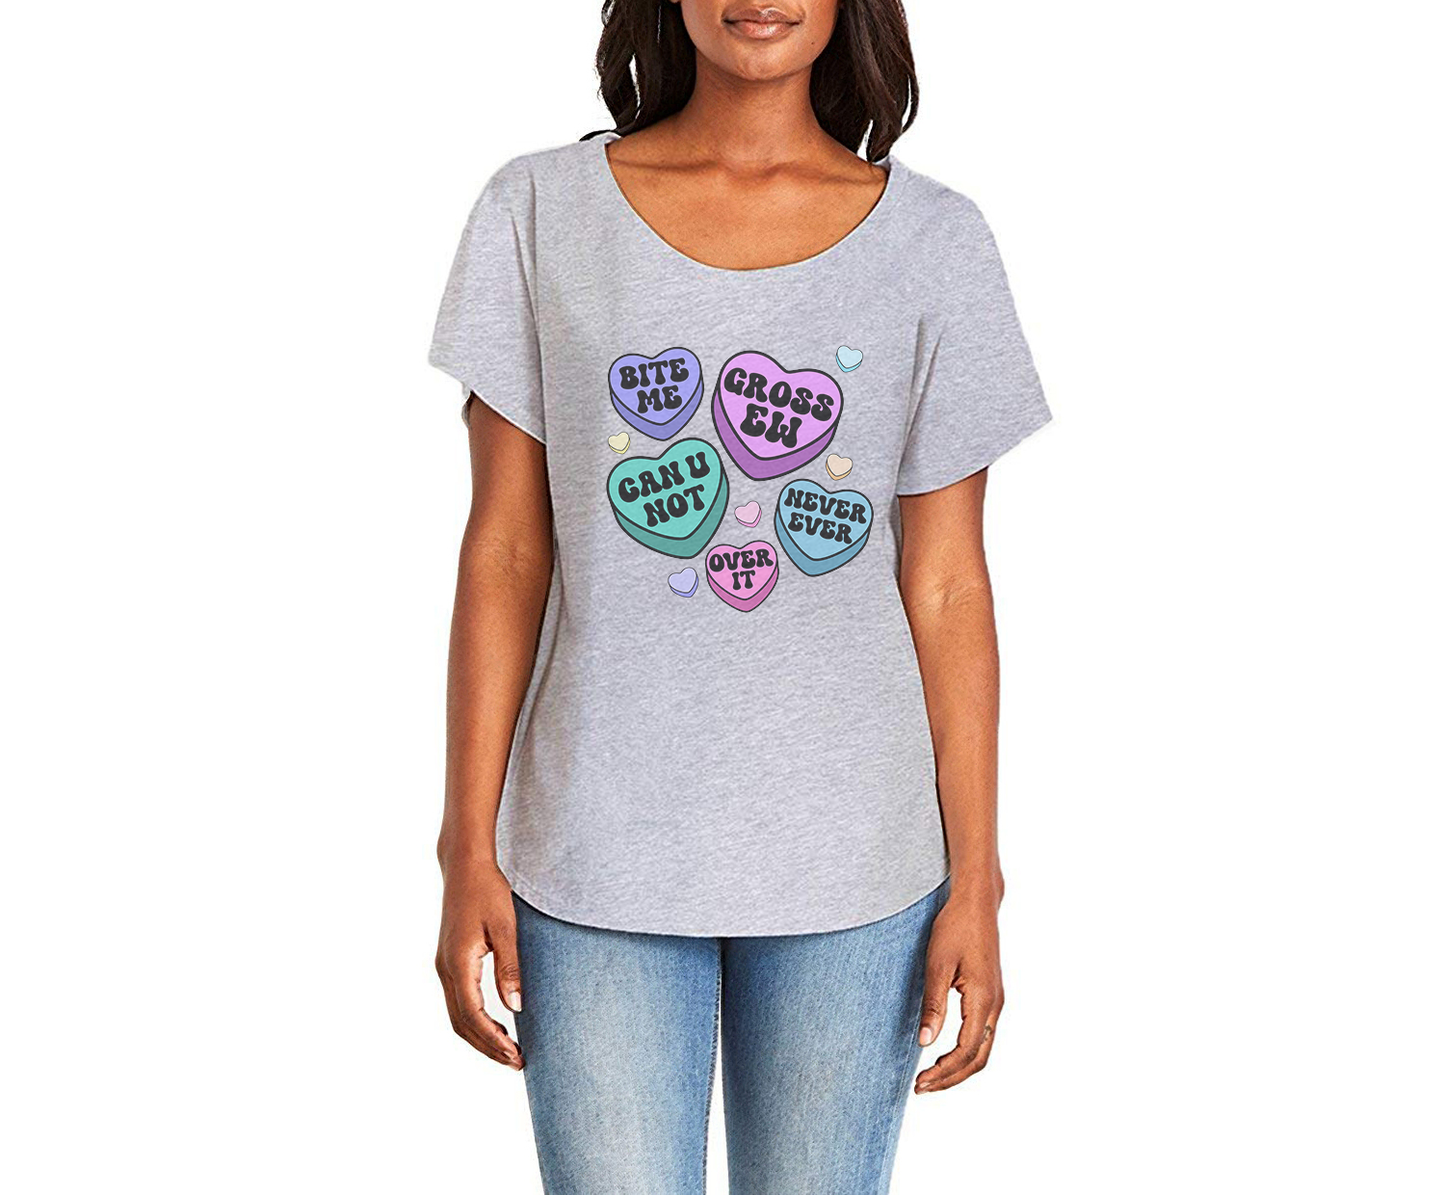 Negative Candy Hearts Ladies Tee Shirt - In Grey & White